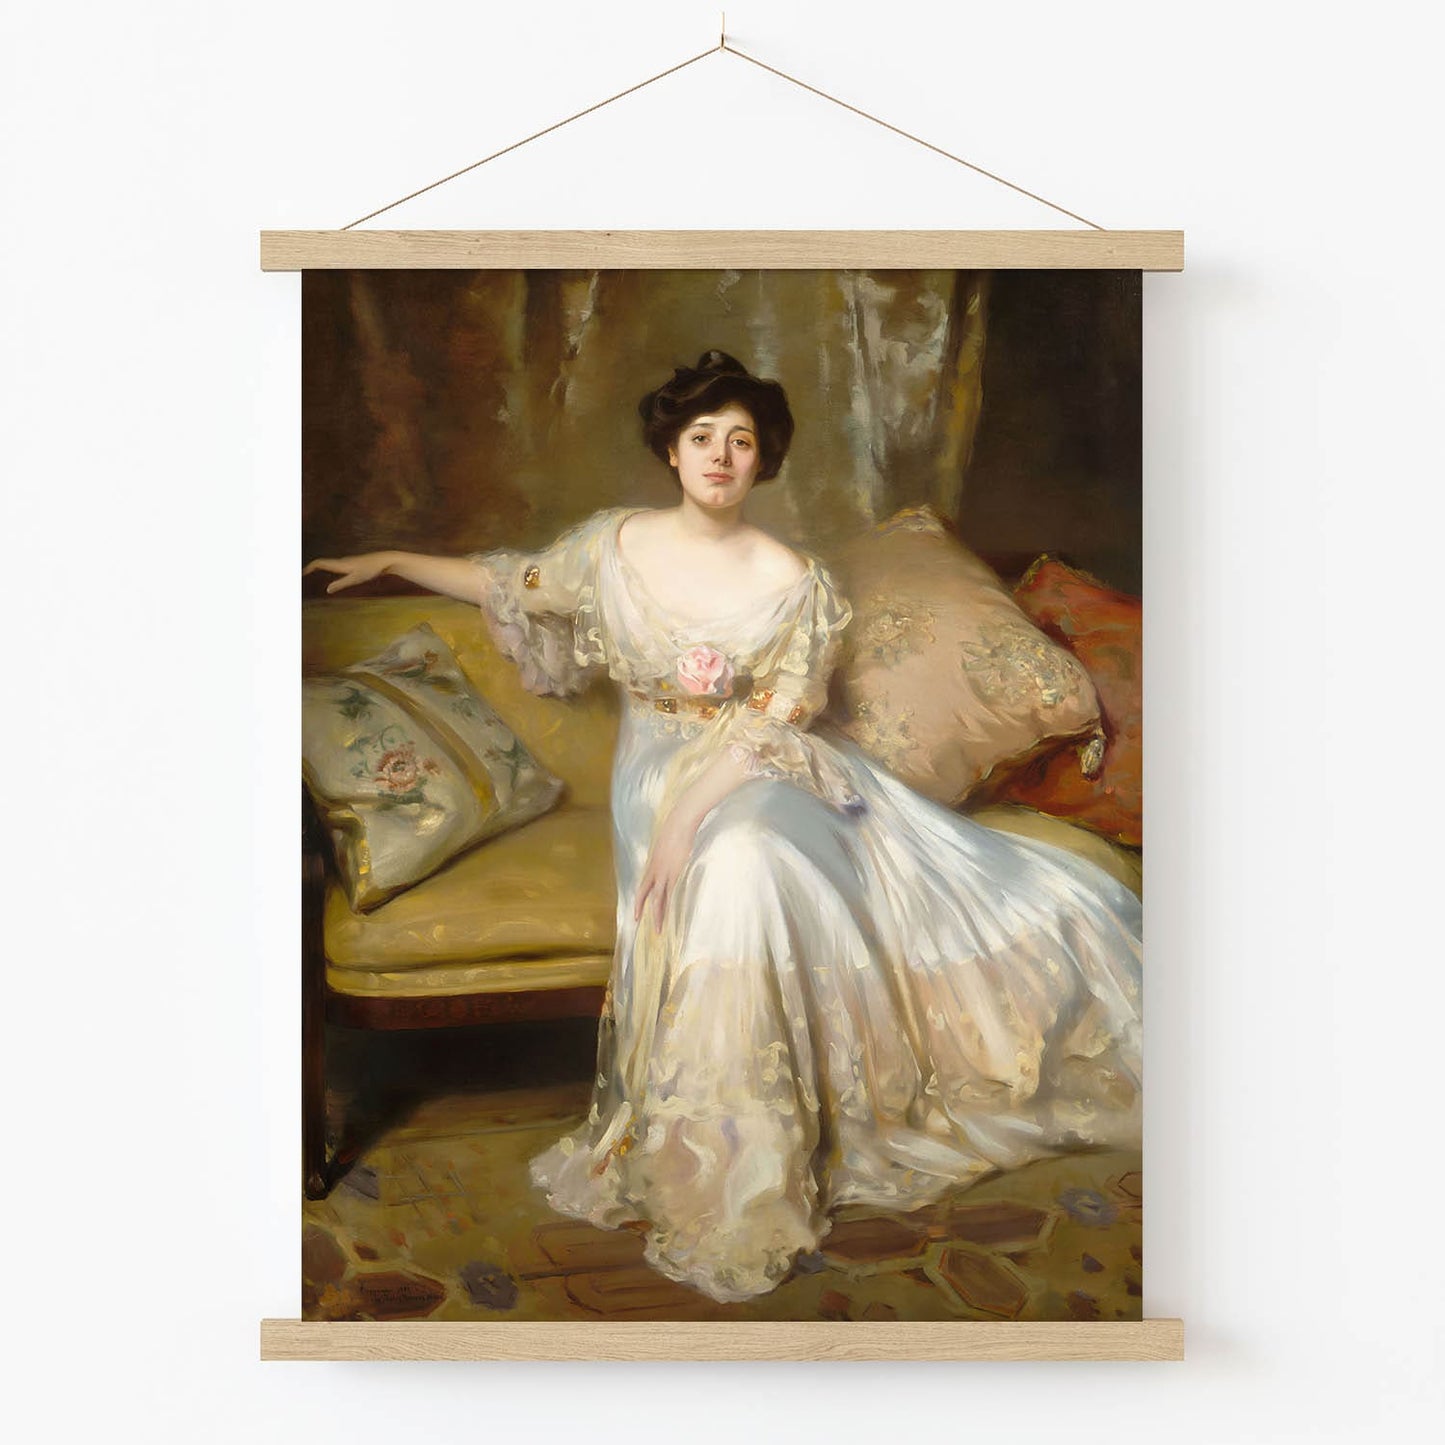 Woman in a White Dress Art Print in Wood Hanger Frame on Wall